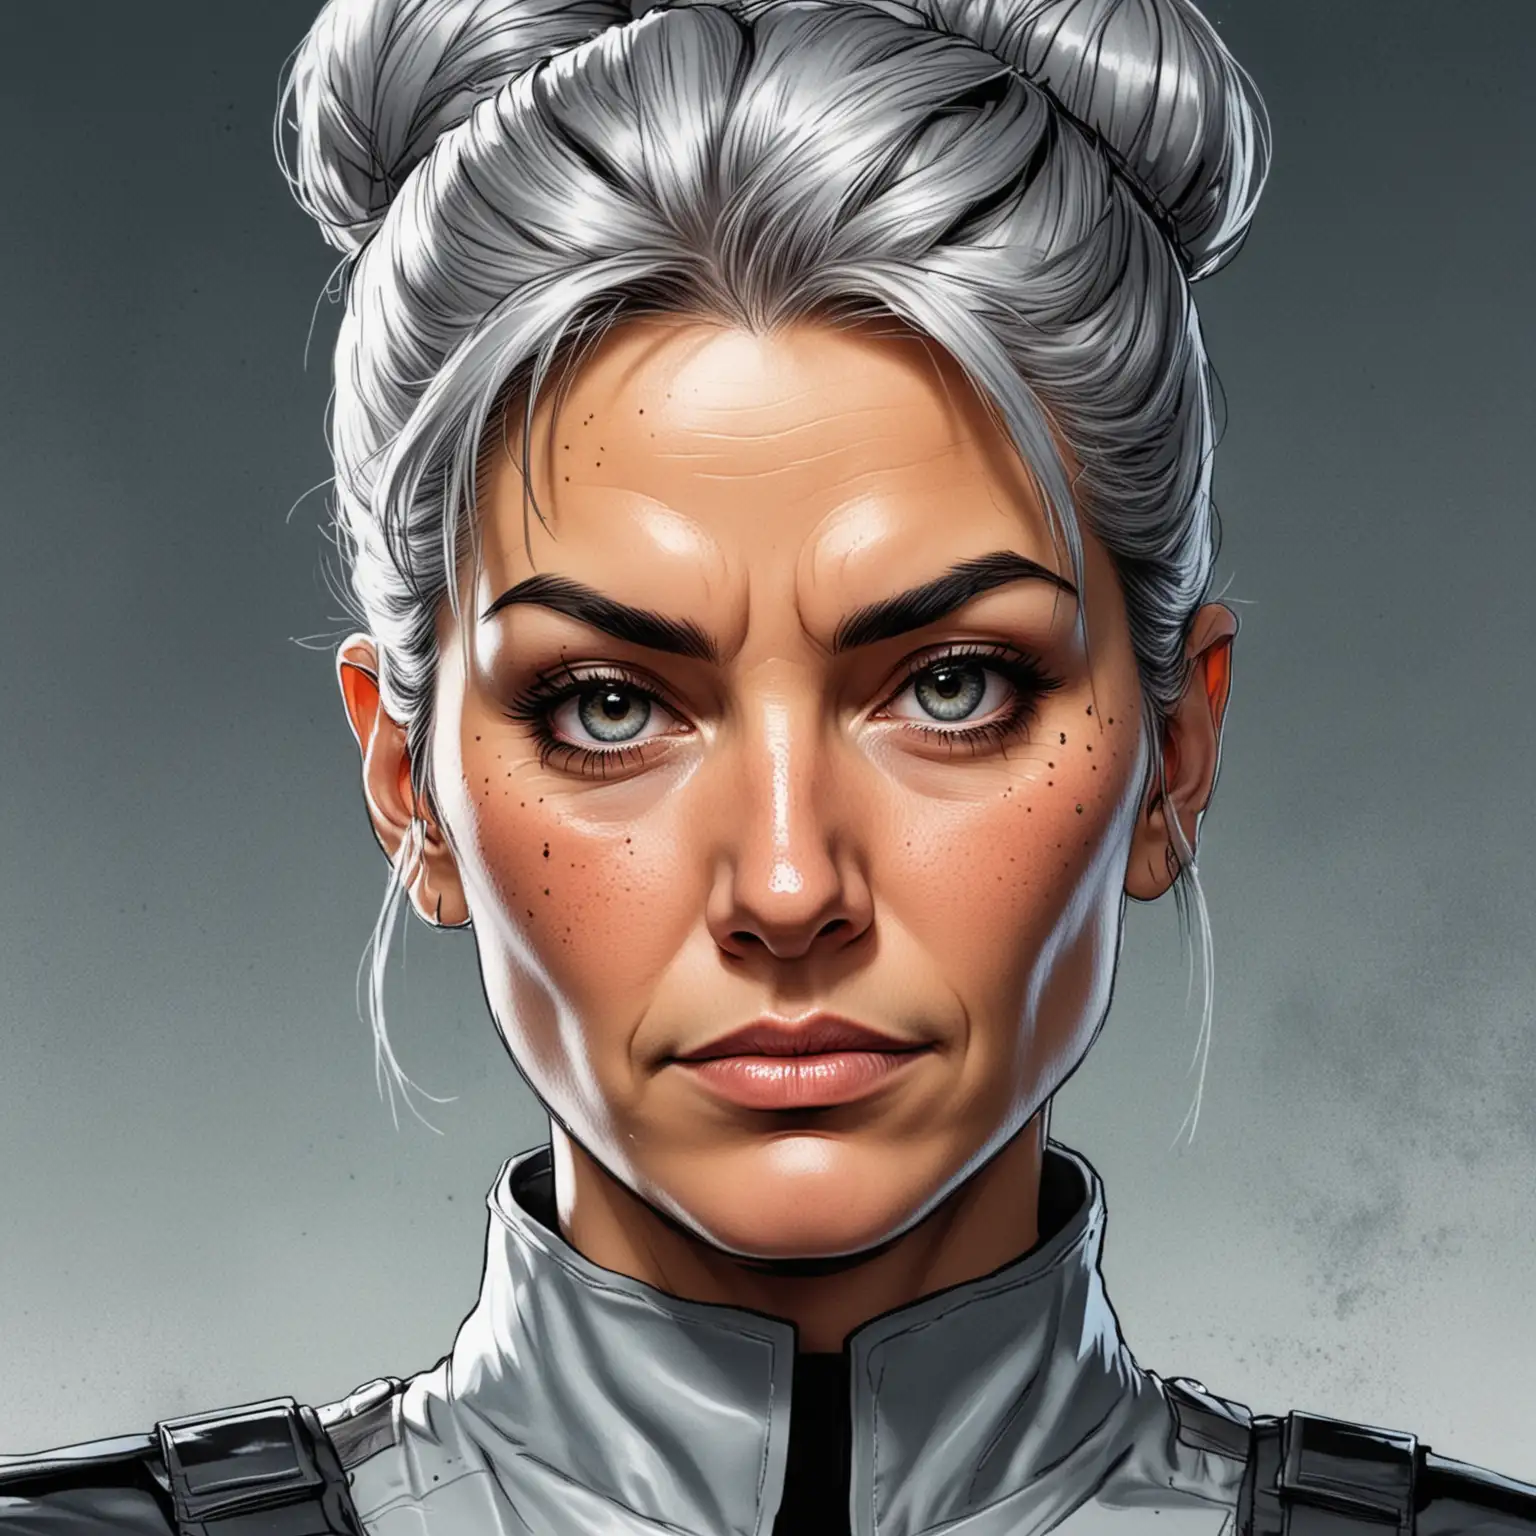 comic book inked color art style; close up portrait; middle aged woman with grey hair in bun; slight wrinkles; futuristic security uniform; stern ; scar over eye